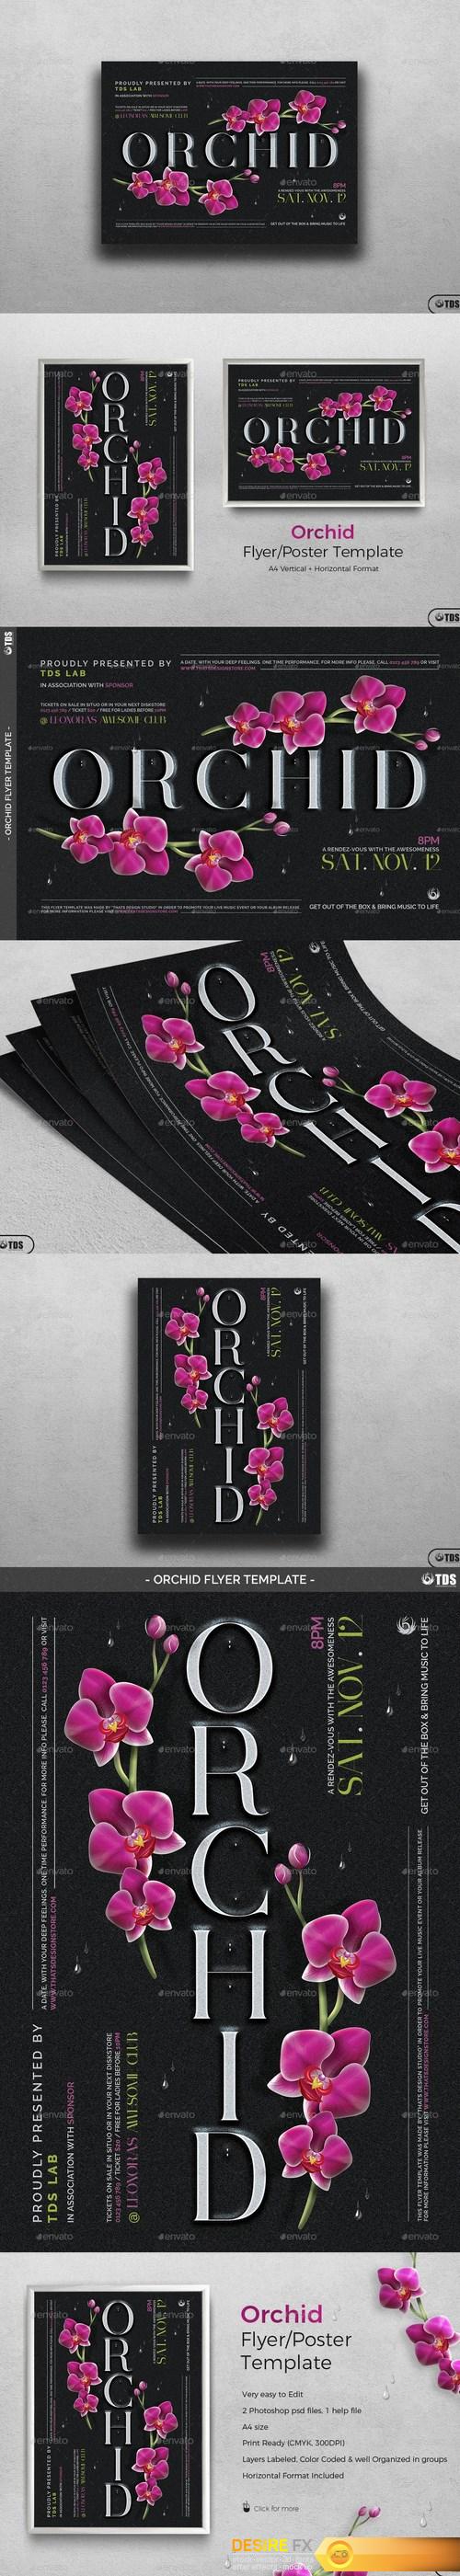 Orchid Flyer Template 19375664